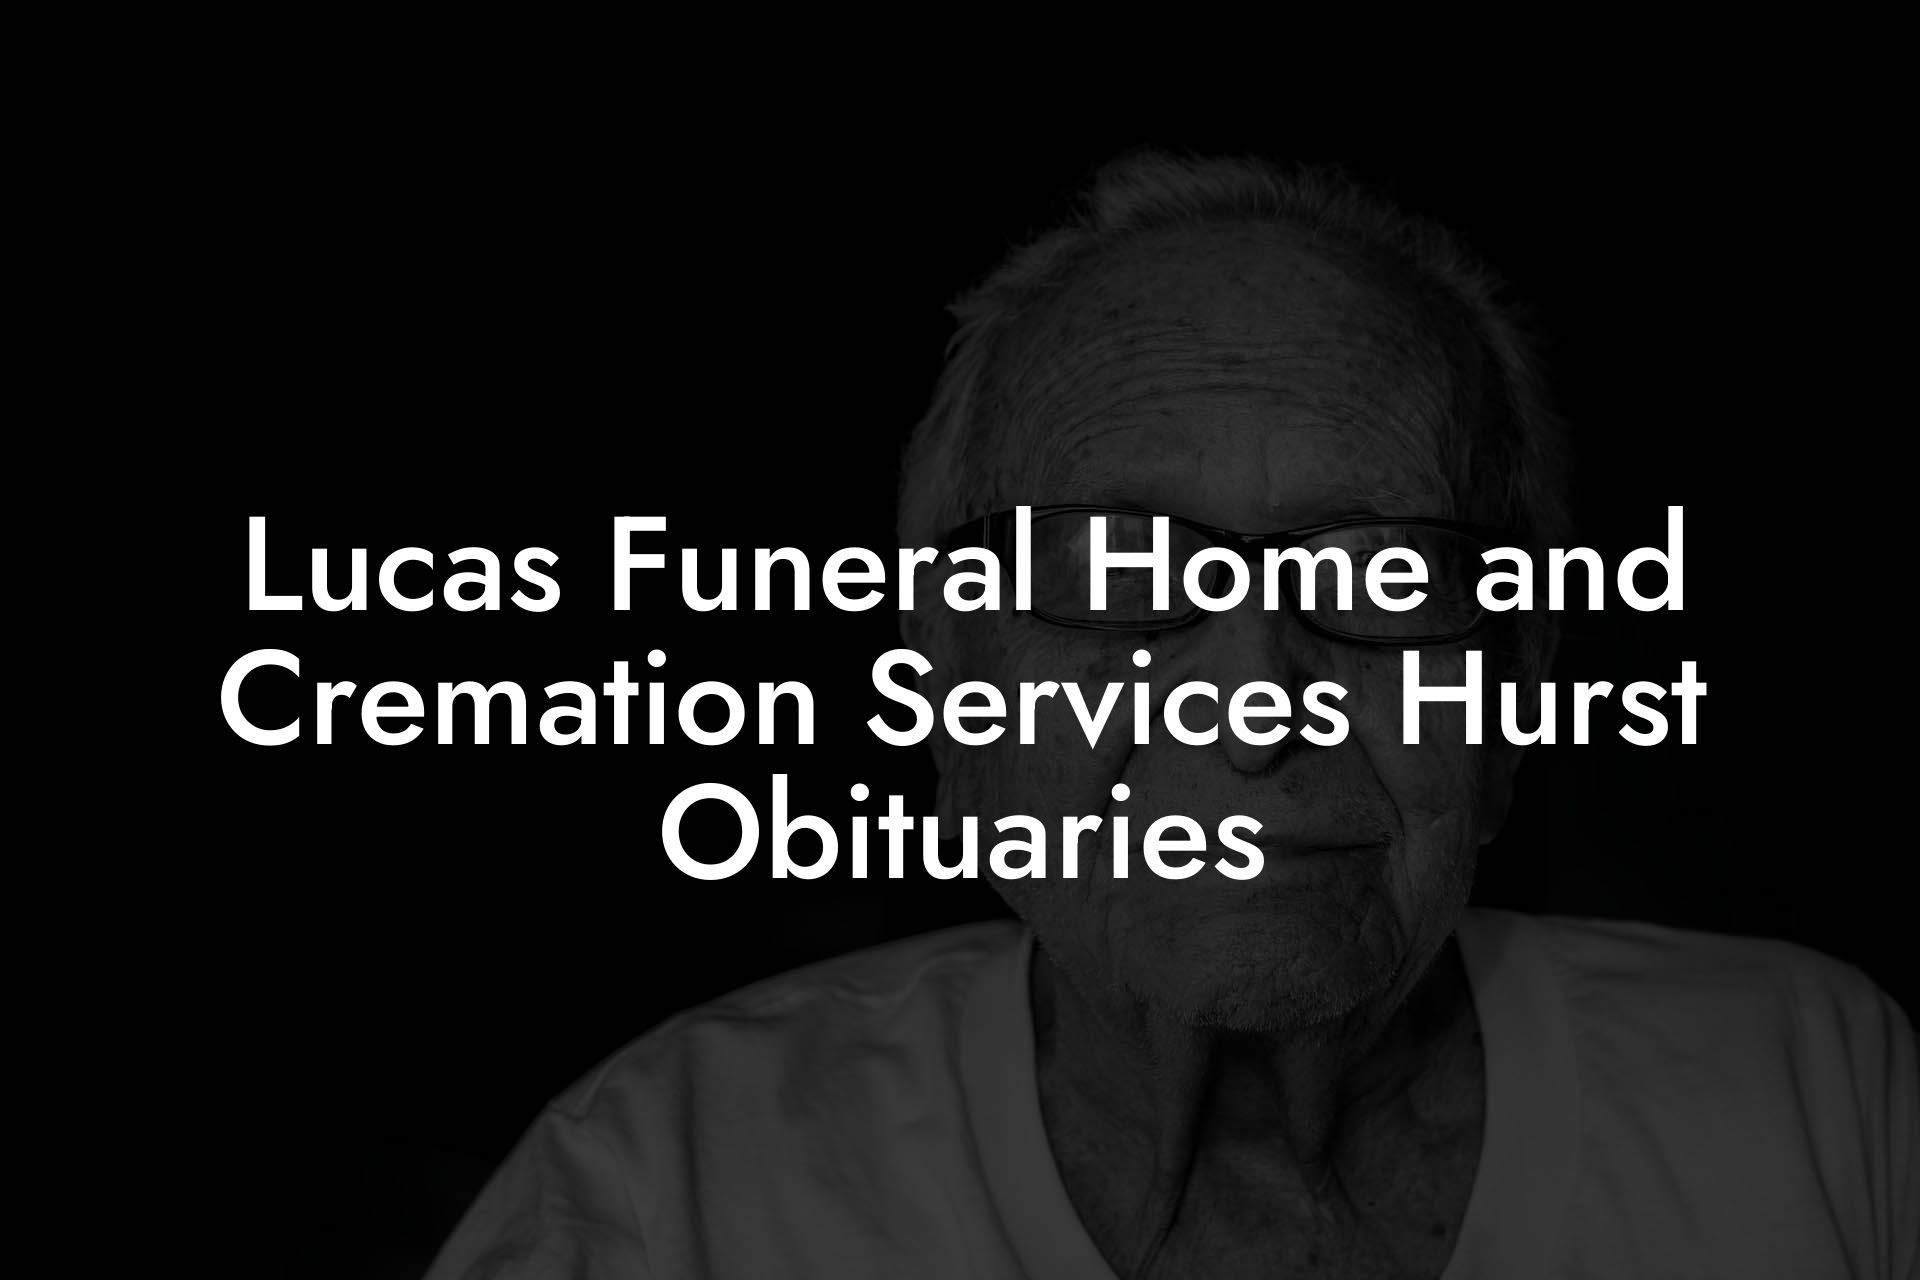 Lucas Funeral Home and Cremation Services Hurst Obituaries